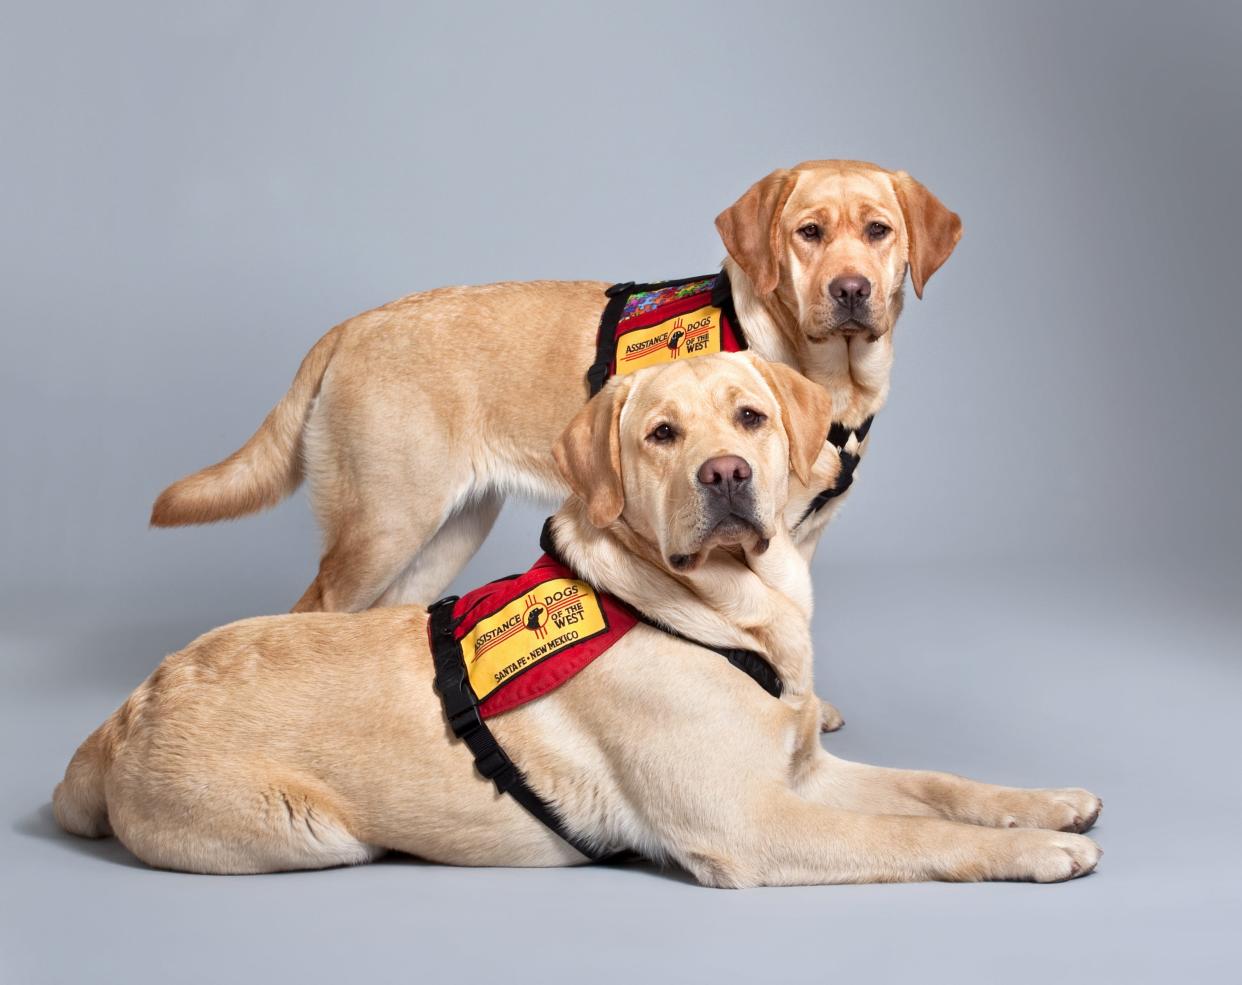 Service dogs trained by Assistance Dogs of the West undergo between 1,500 and 2,000 hours of instruction.